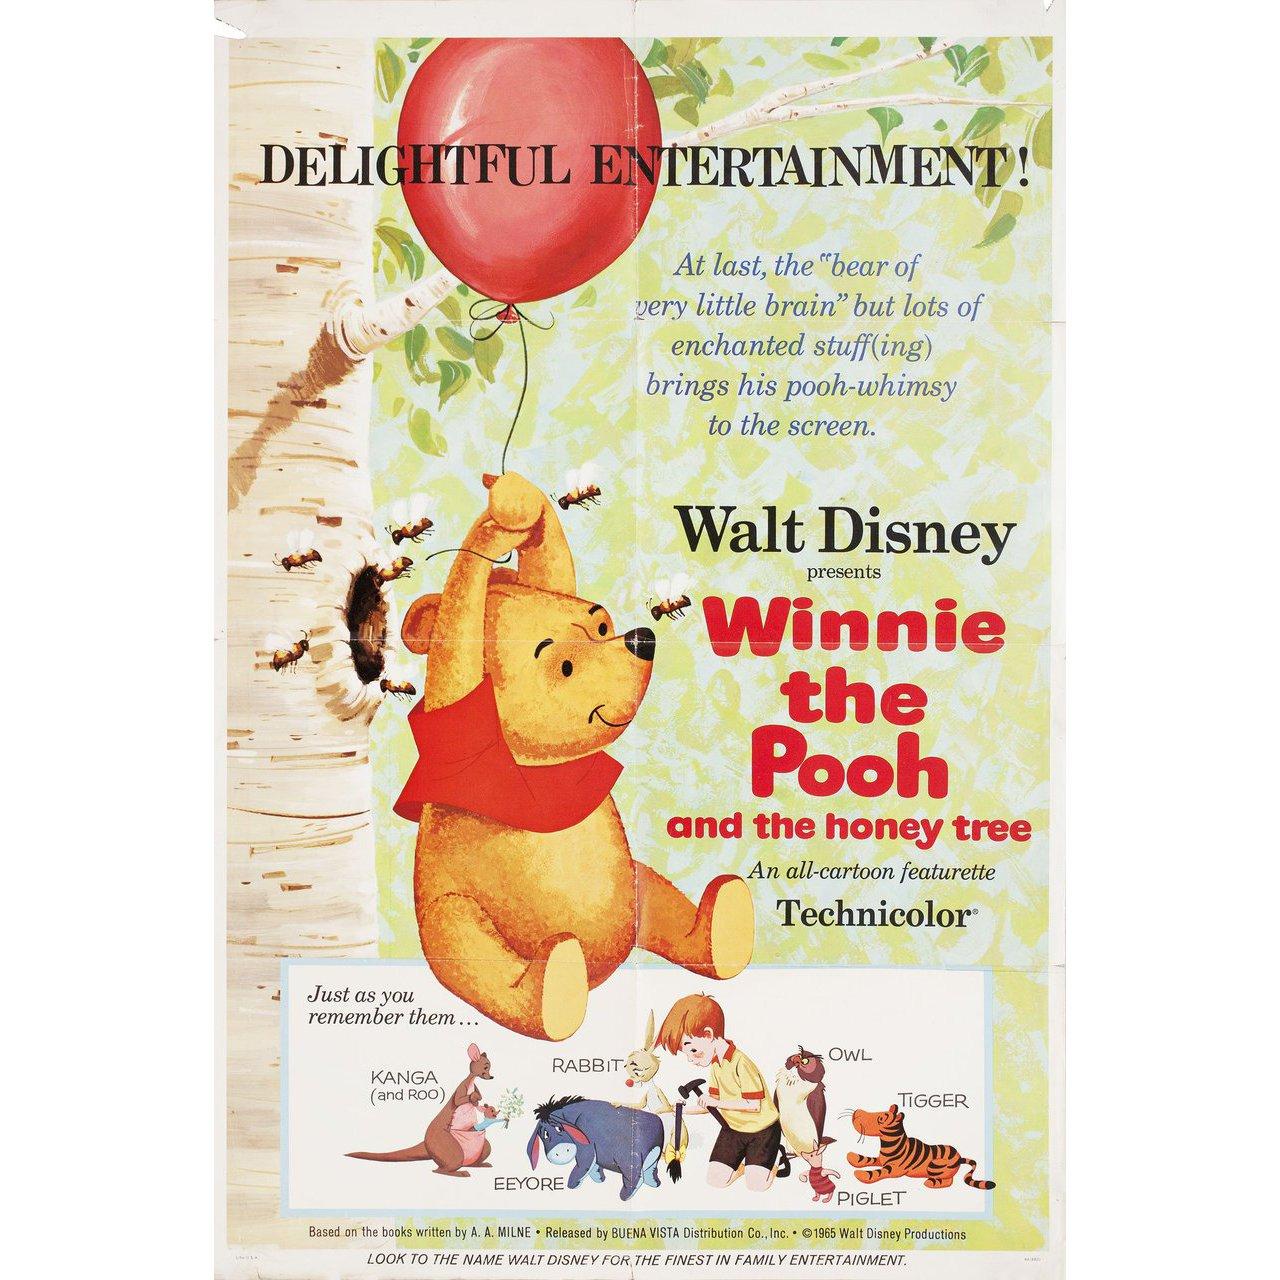 Original 1966 U.S. one sheet poster for the film ‘Winnie the Pooh and the Honey Tree’ directed by Wolfgang Reitherman with Sterling Holloway / Junius Matthews / Hal Smith / Howard Morris. Very good condition, folded with edge & fold wear. Many